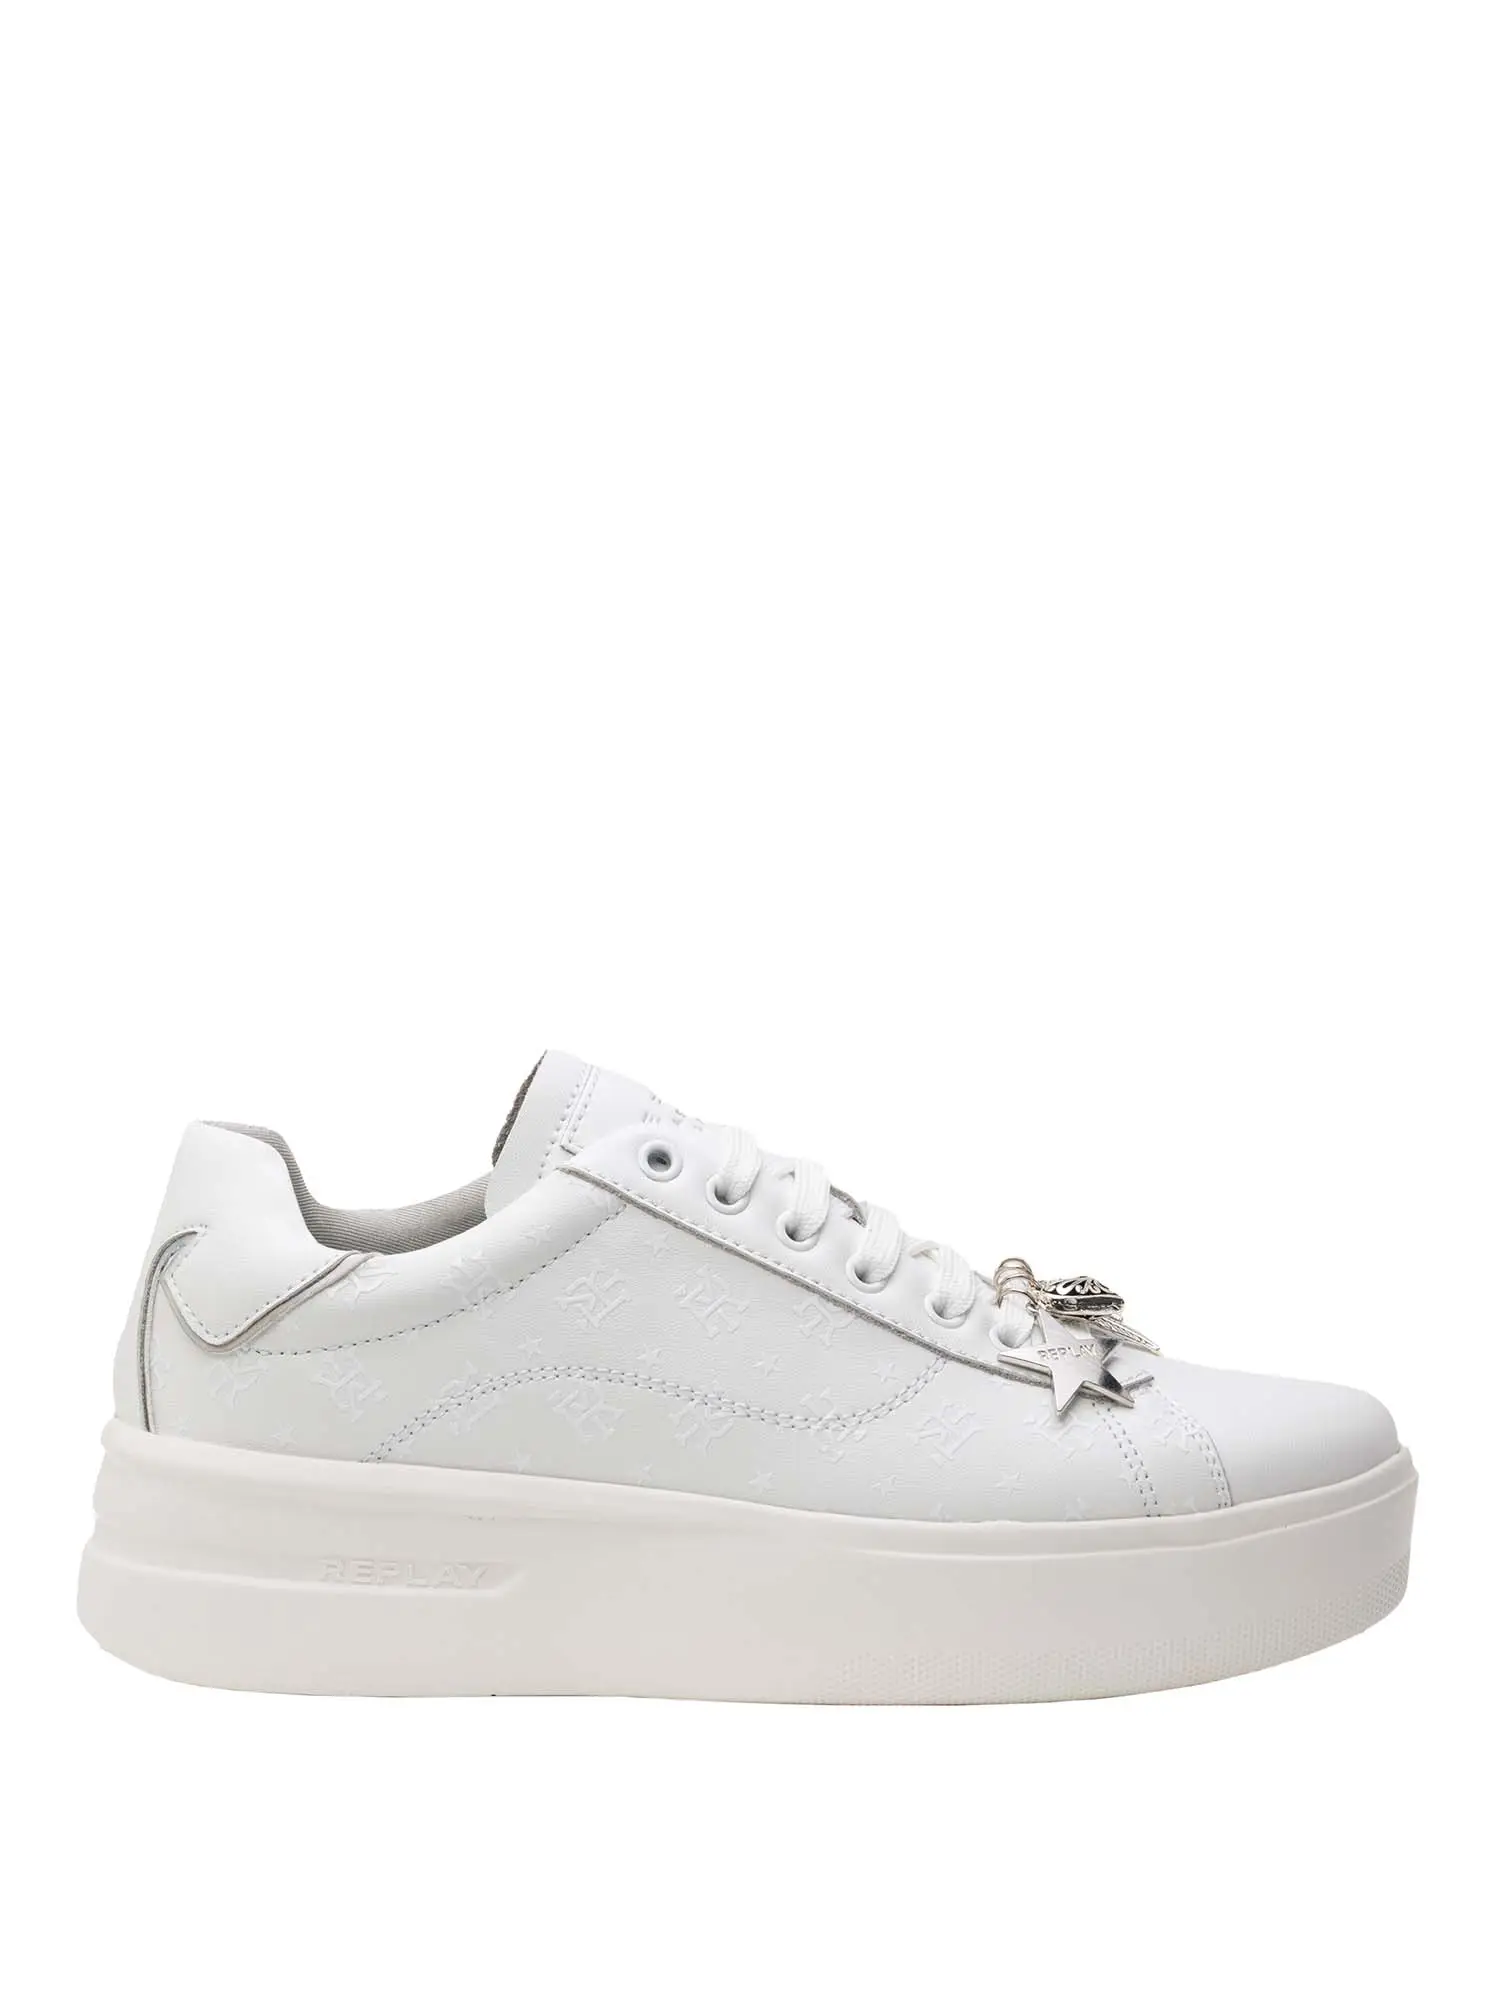 SNEAKERS DONNA - REPLAY - RZ4N0013L - BIANCO, 38